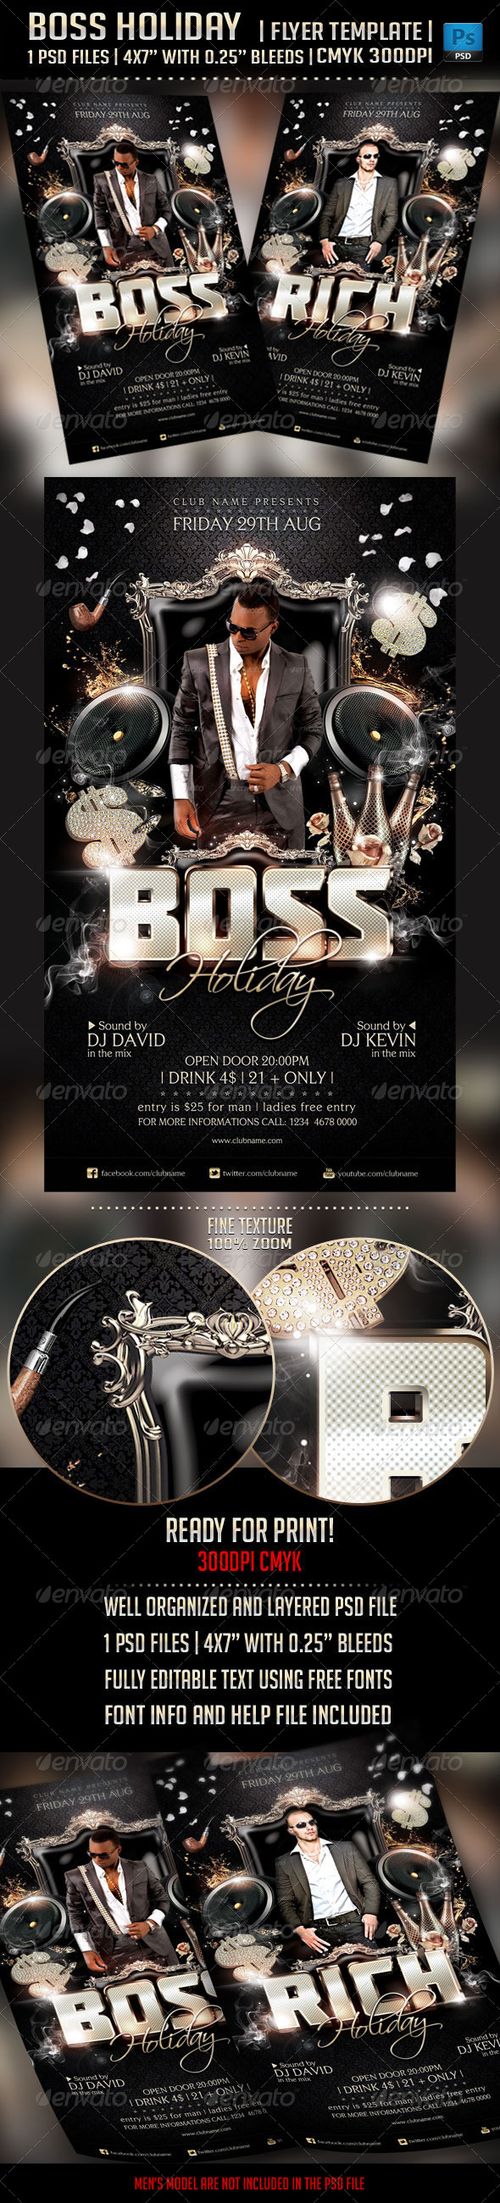 Boss Holiday Flyer Template